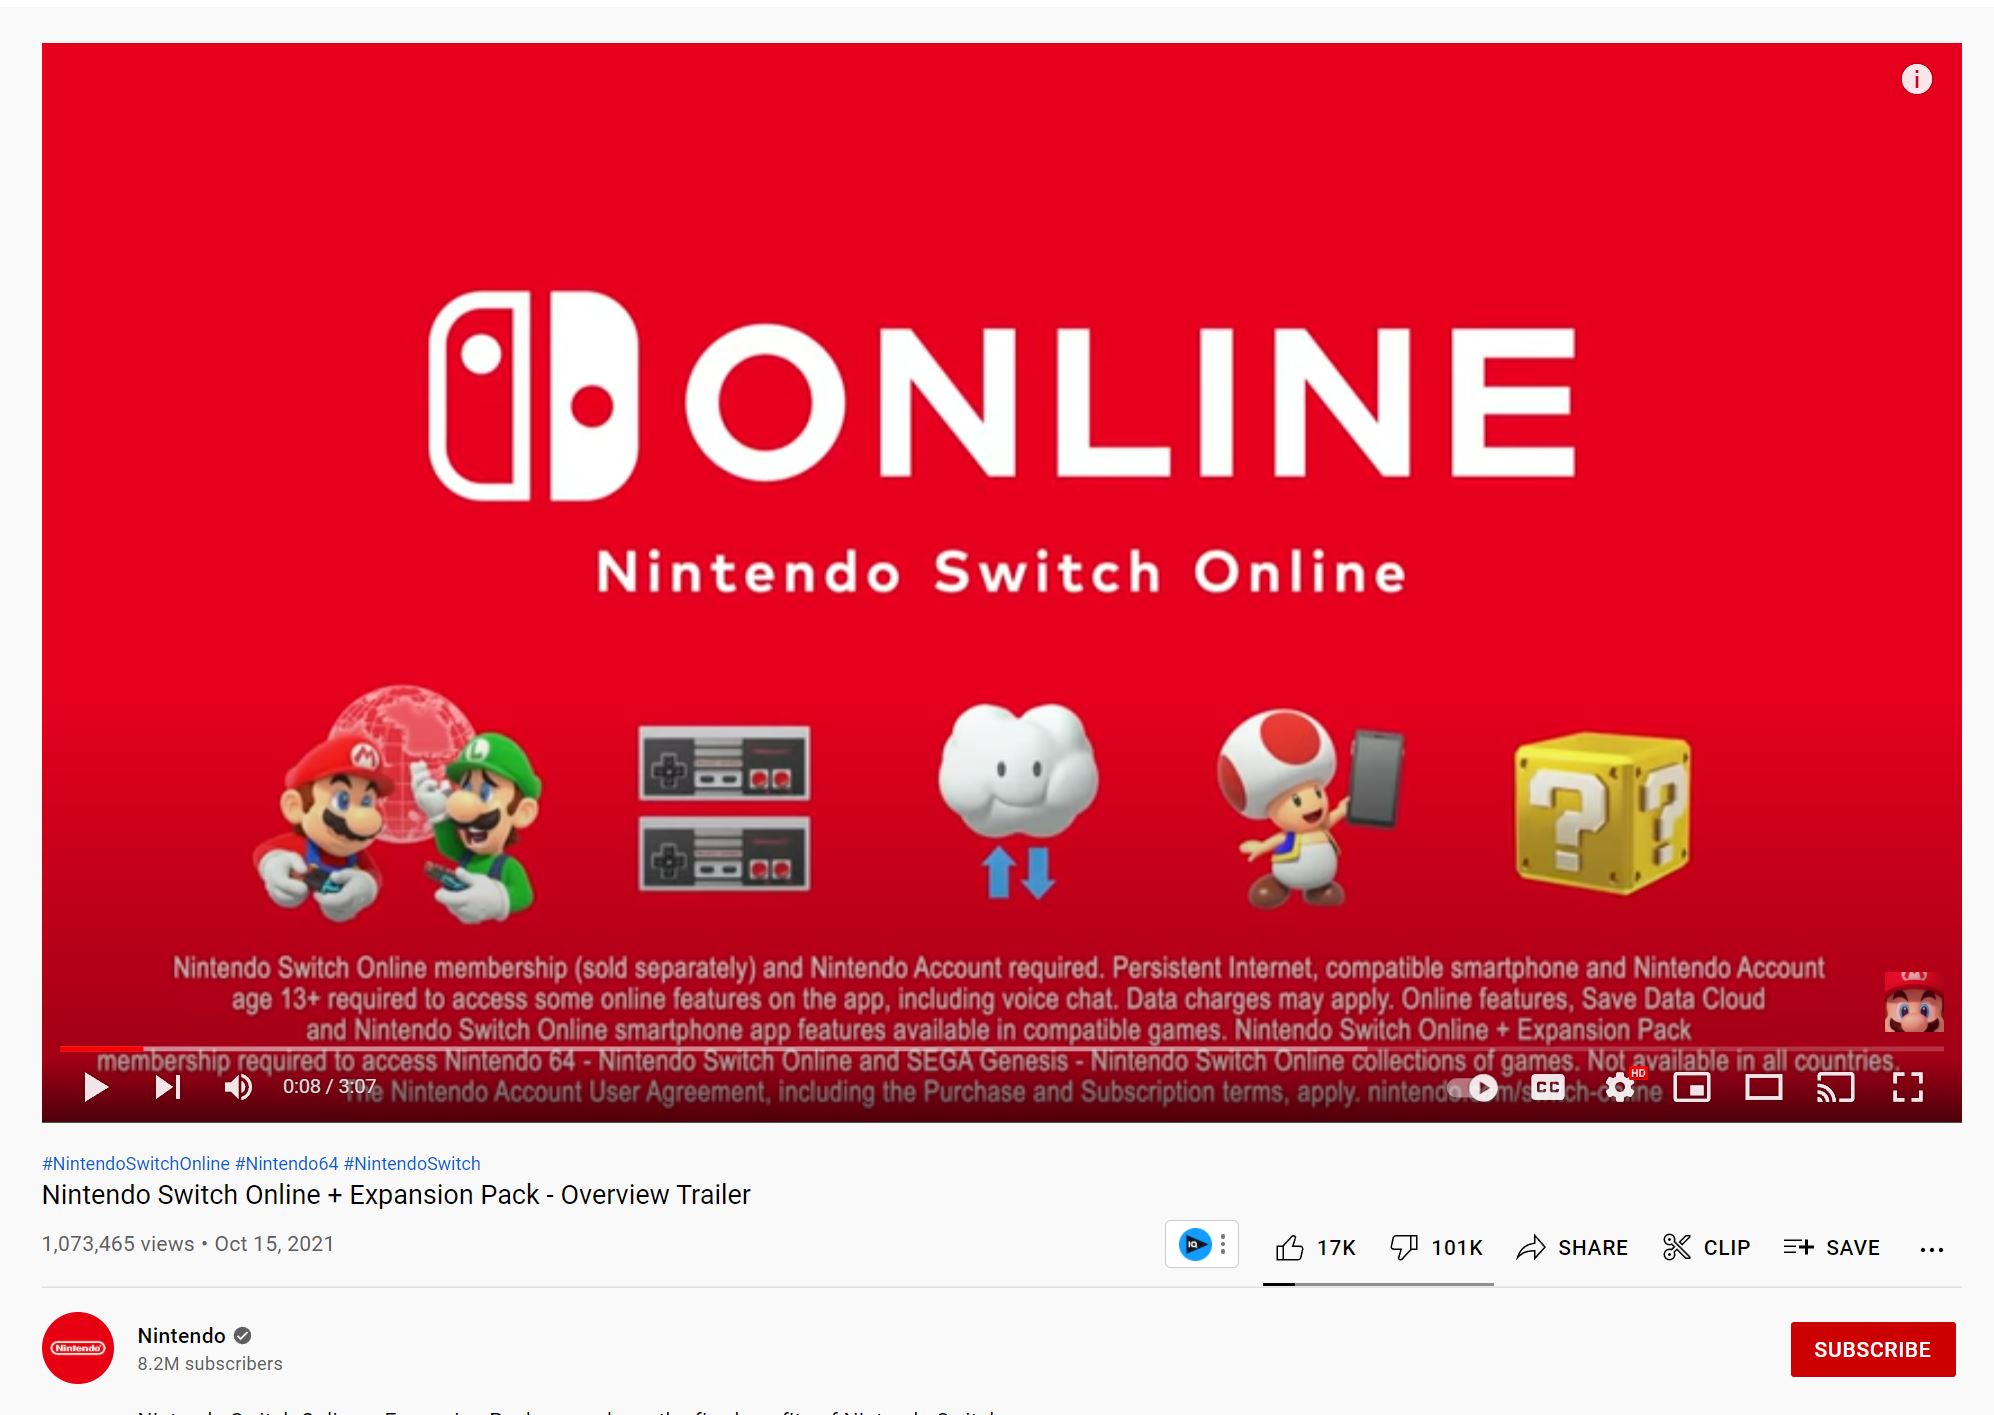 Nintendo Switch Online vs Nintendo Switch Online Expansion Pack